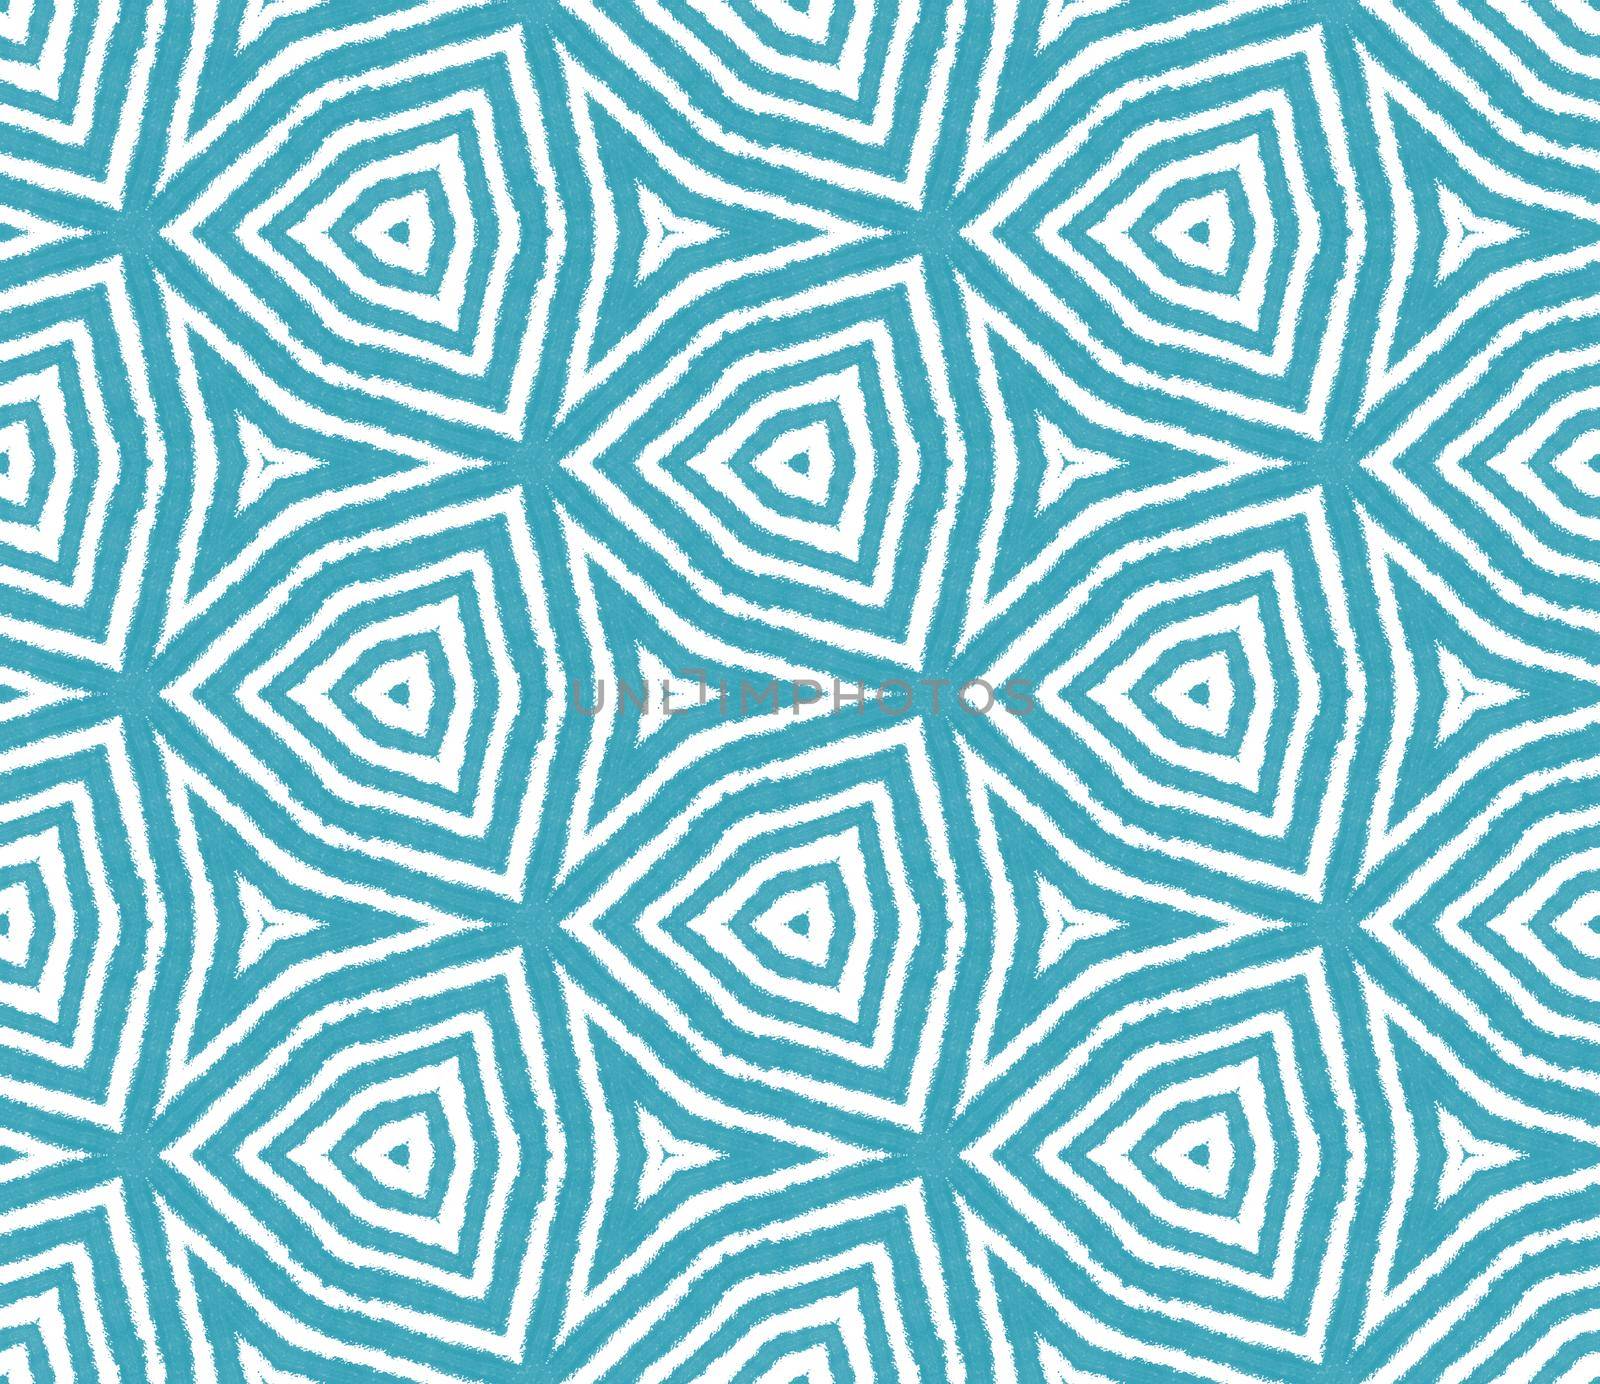 Ethnic hand painted pattern. Turquoise symmetrical kaleidoscope background. Summer dress ethnic hand painted tile. Textile ready fresh print, swimwear fabric, wallpaper, wrapping.